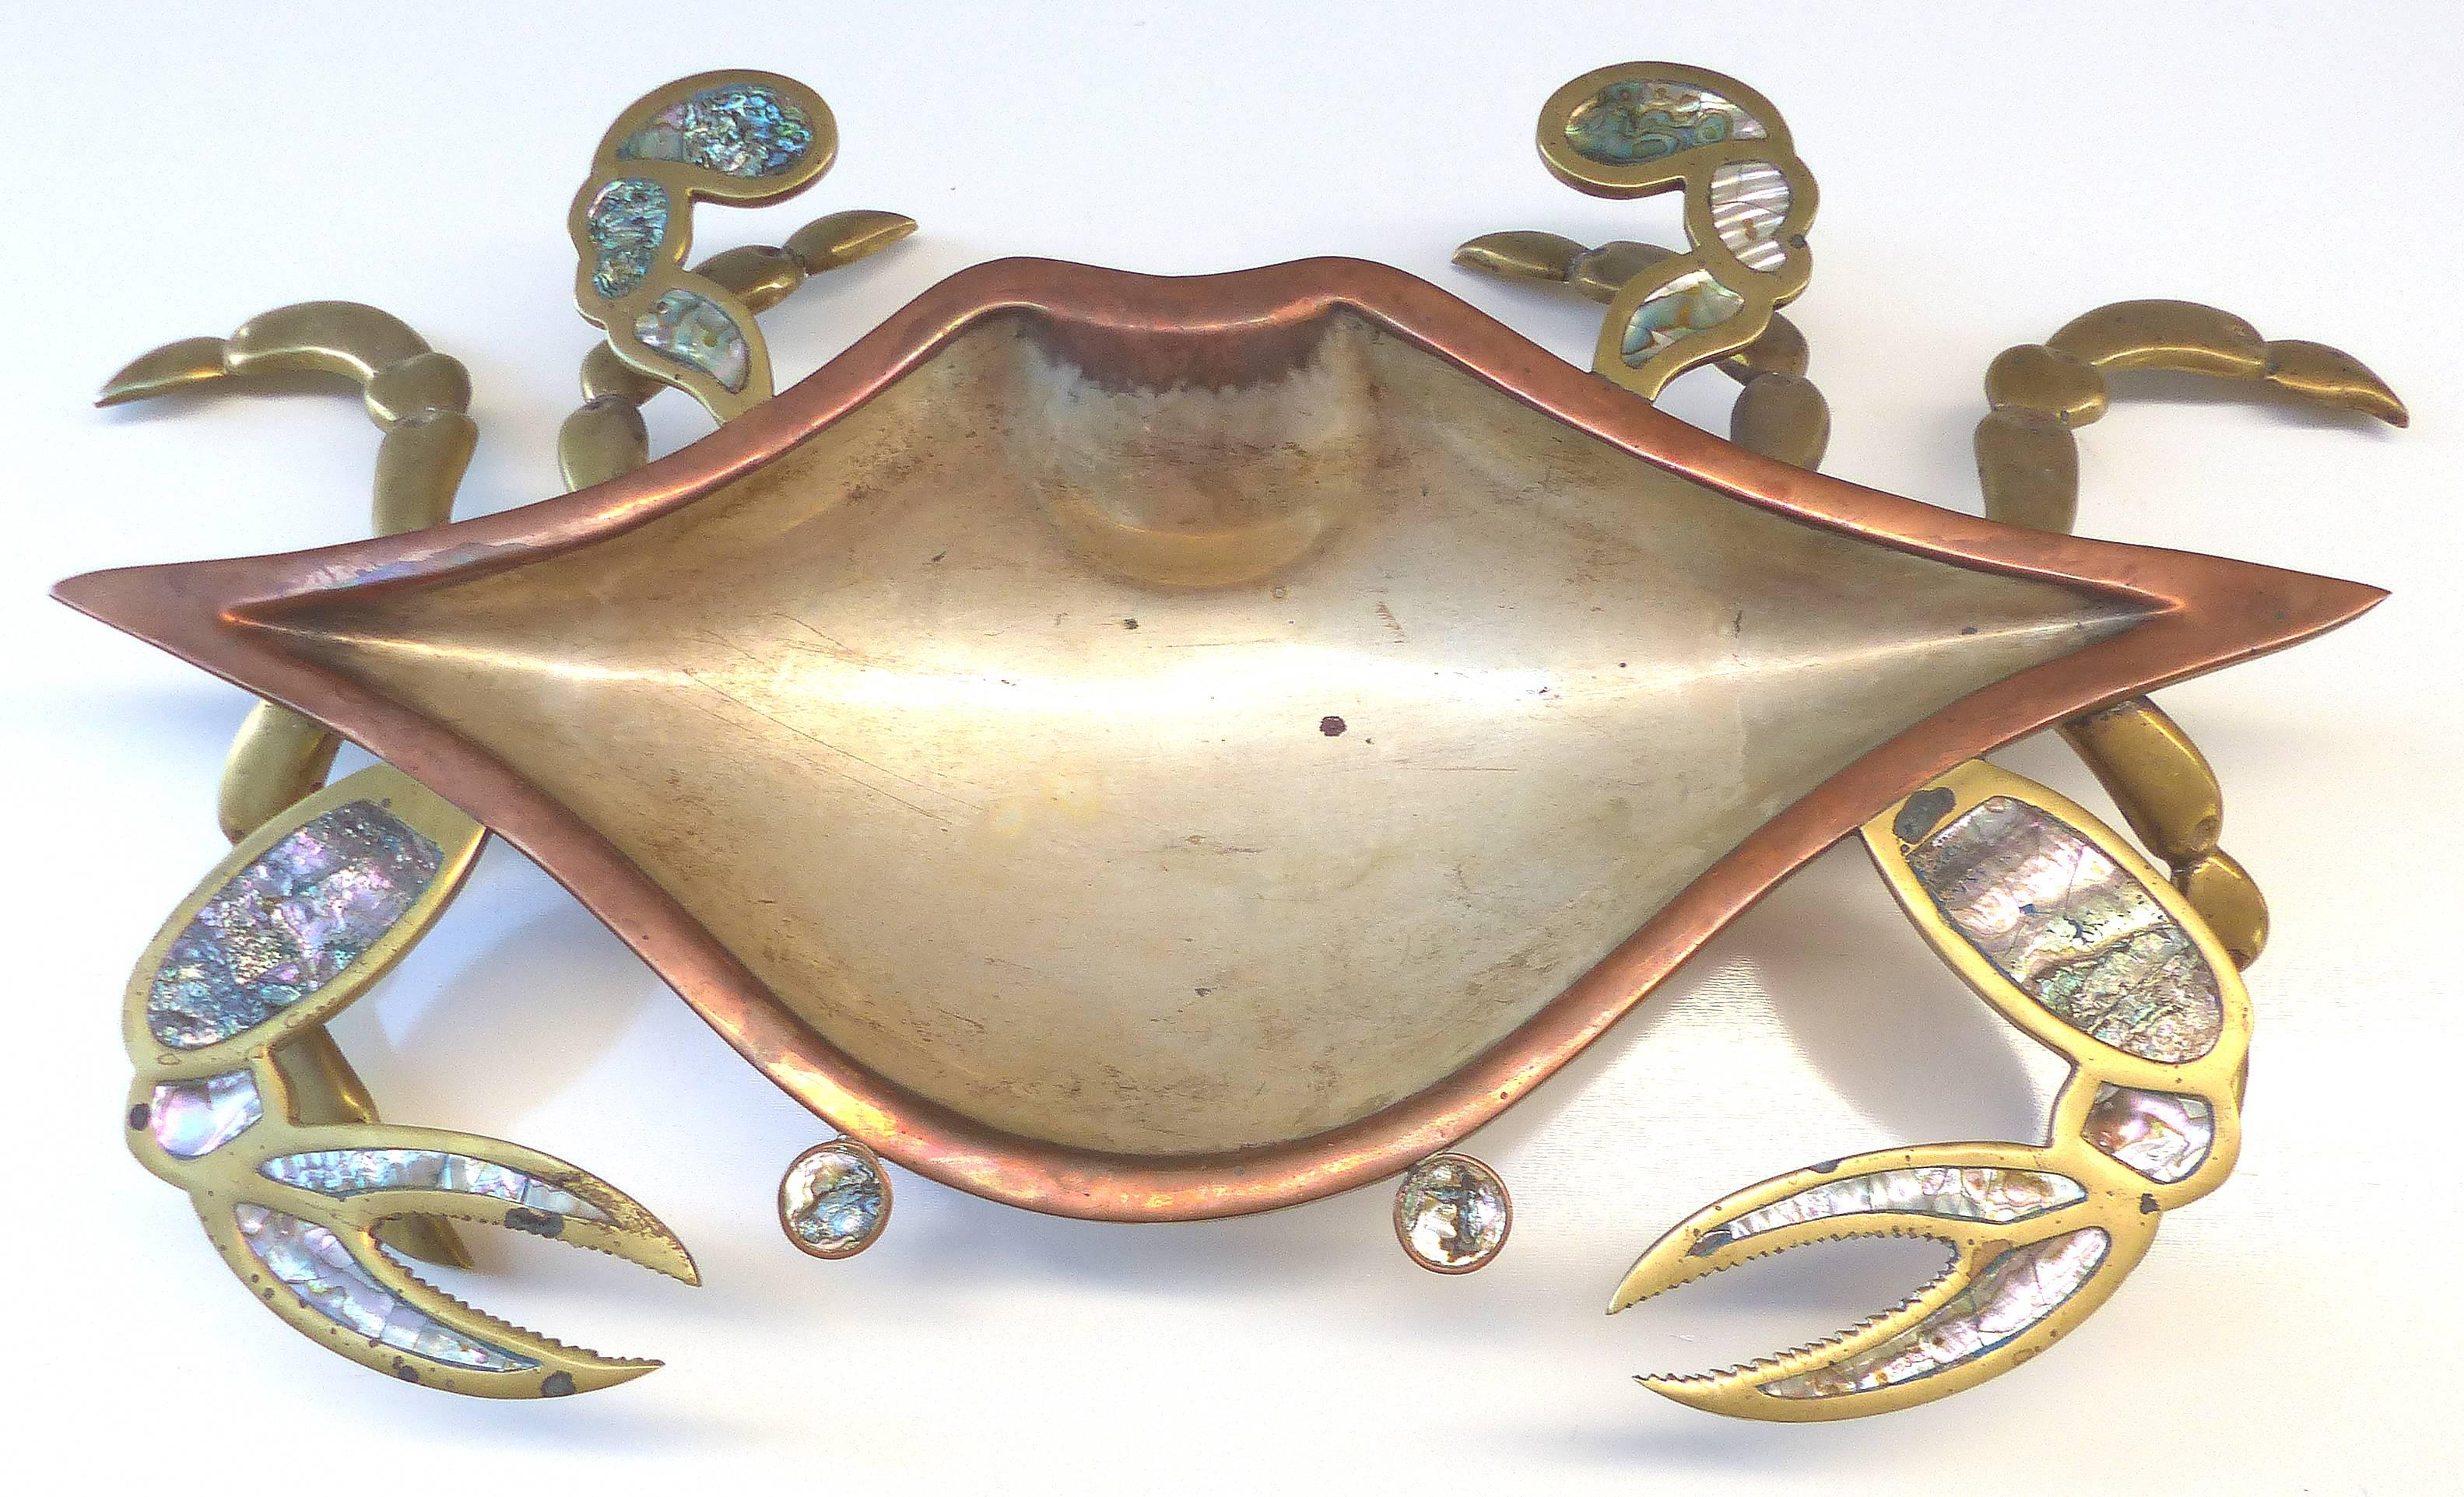 Monumental Los Castillos Style Abalone Metal Crab Bowl with Two Side Dishes

Offered for sale is a rare three piece set of copper and brass crab serving pieces inset with abalone from Tlaquepaque FCS Cobre Mexico. There are two smaller crabs and one